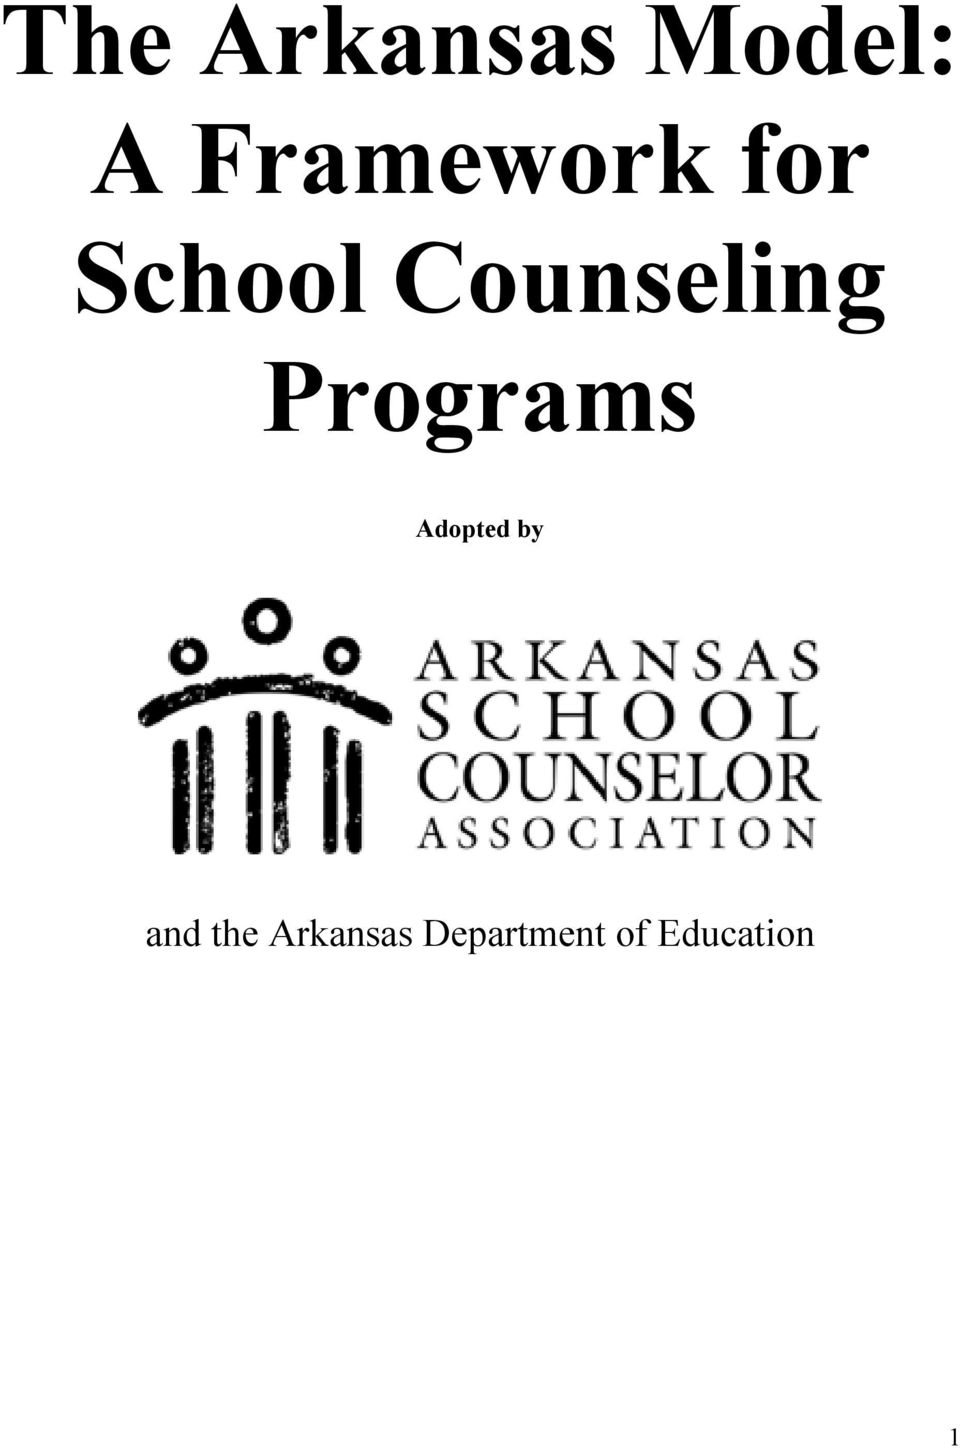 Counseling Programs Adopted